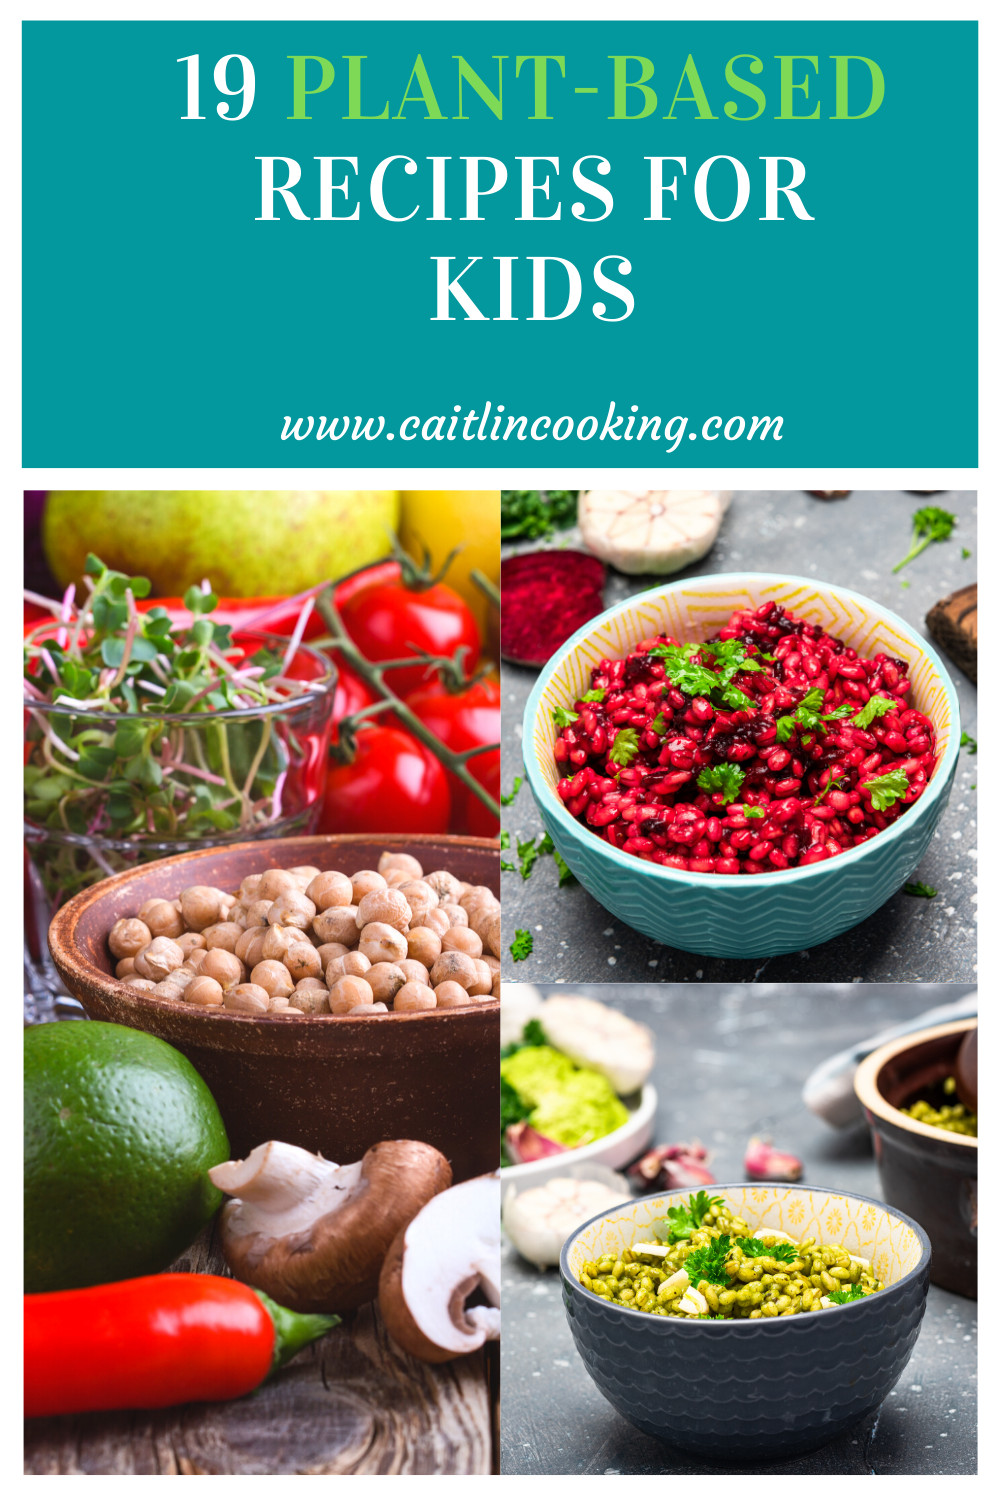 Clean Plant Based Recipes
 19 Plant Based Recipes for Kids Clean Cooking with